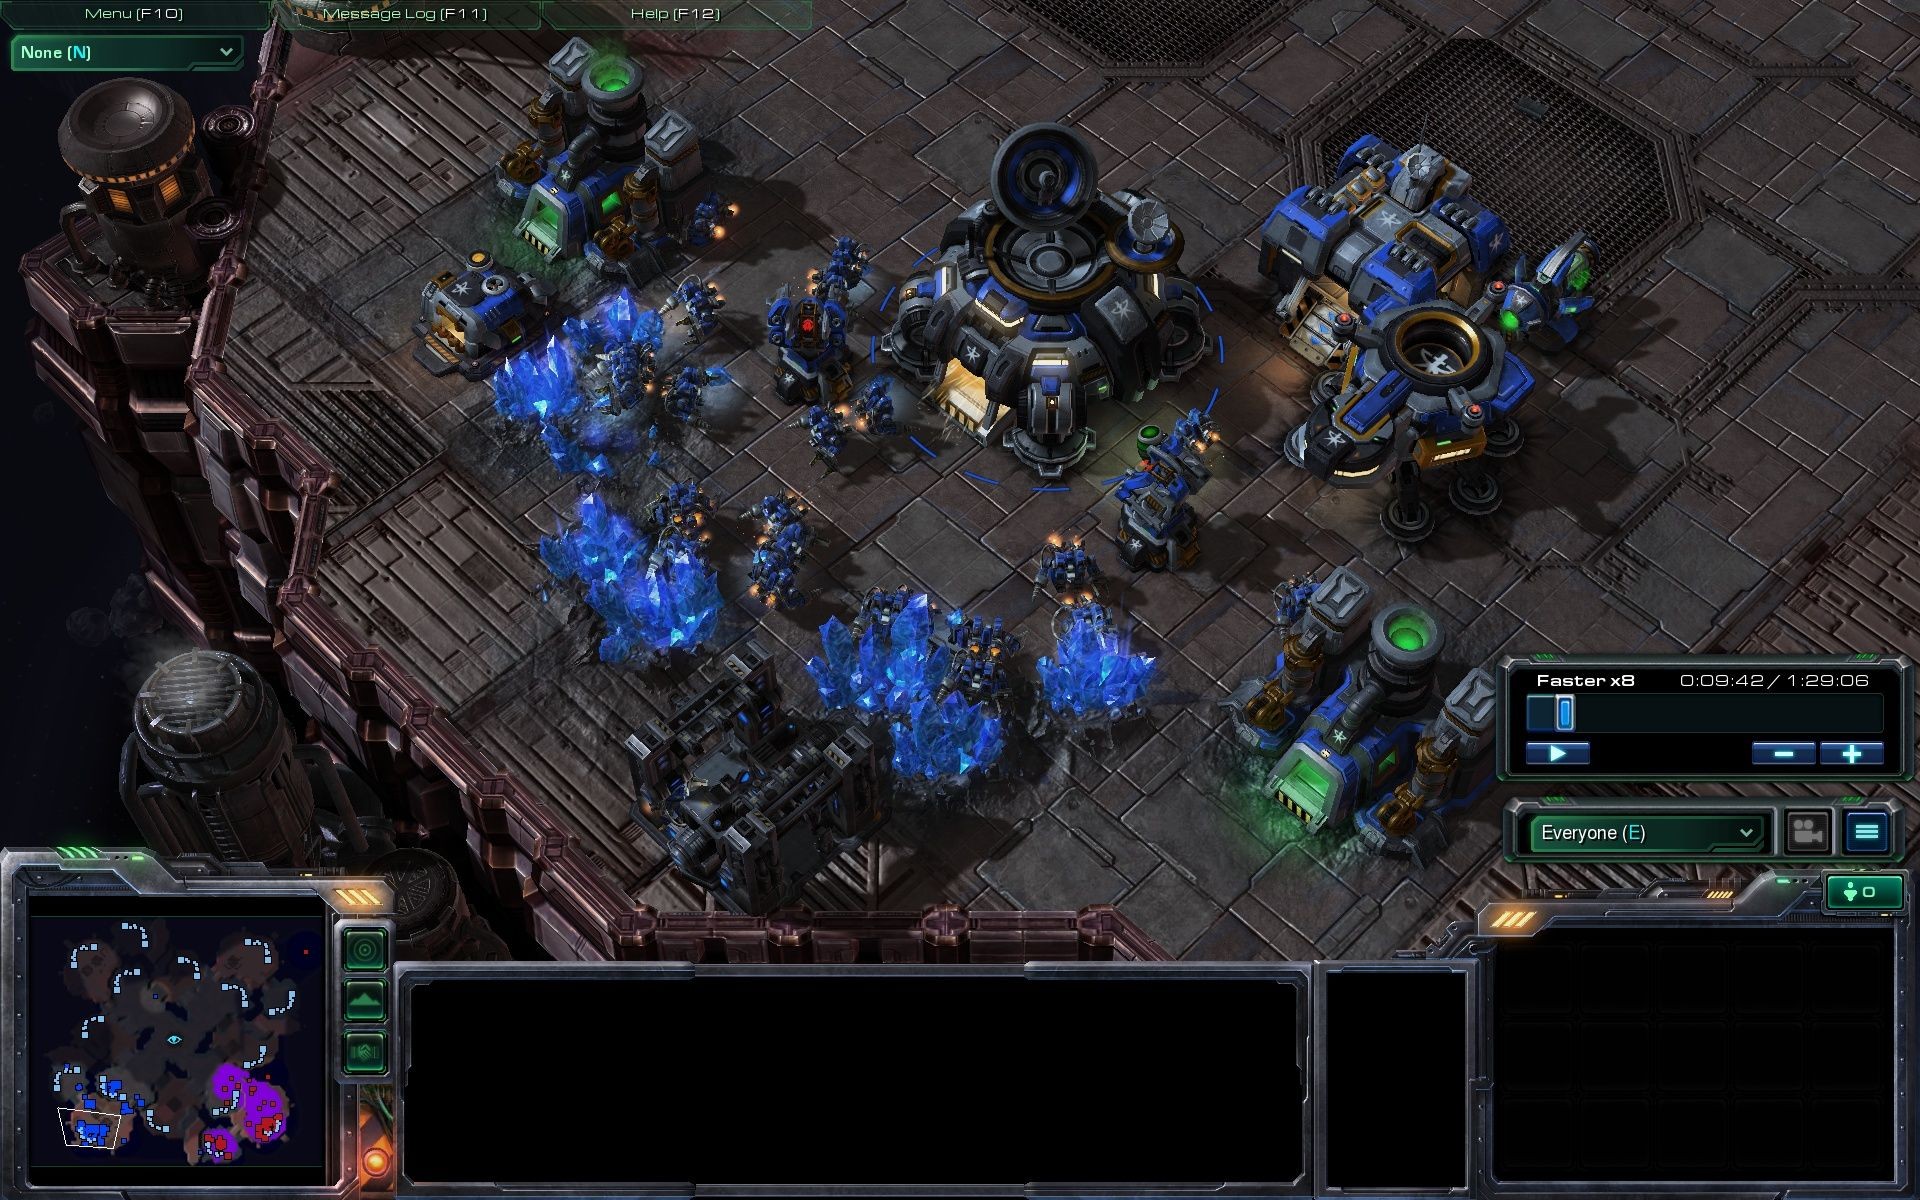 full starcraft 2 game on another pc